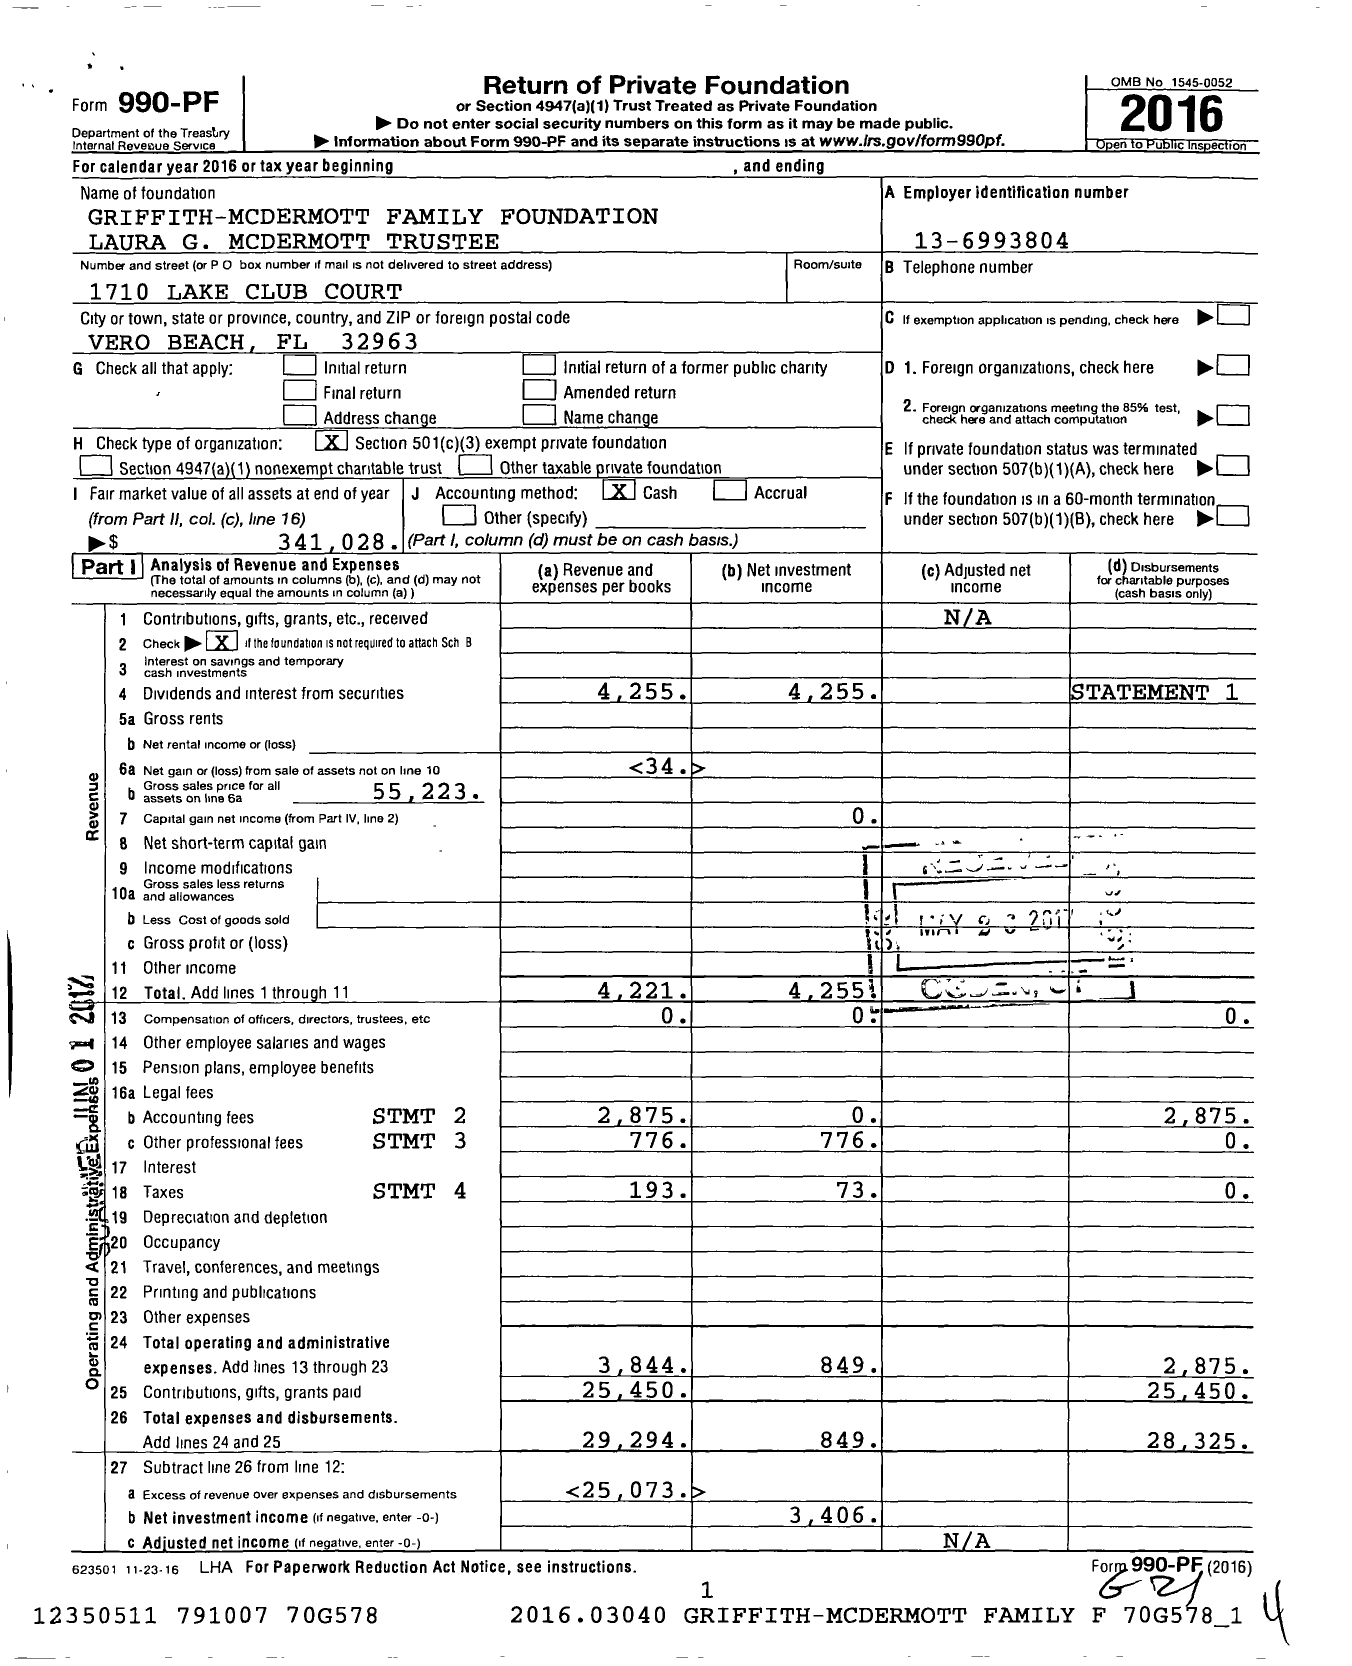 Image of first page of 2016 Form 990PF for Griffith-Mcdermott Family Foundation